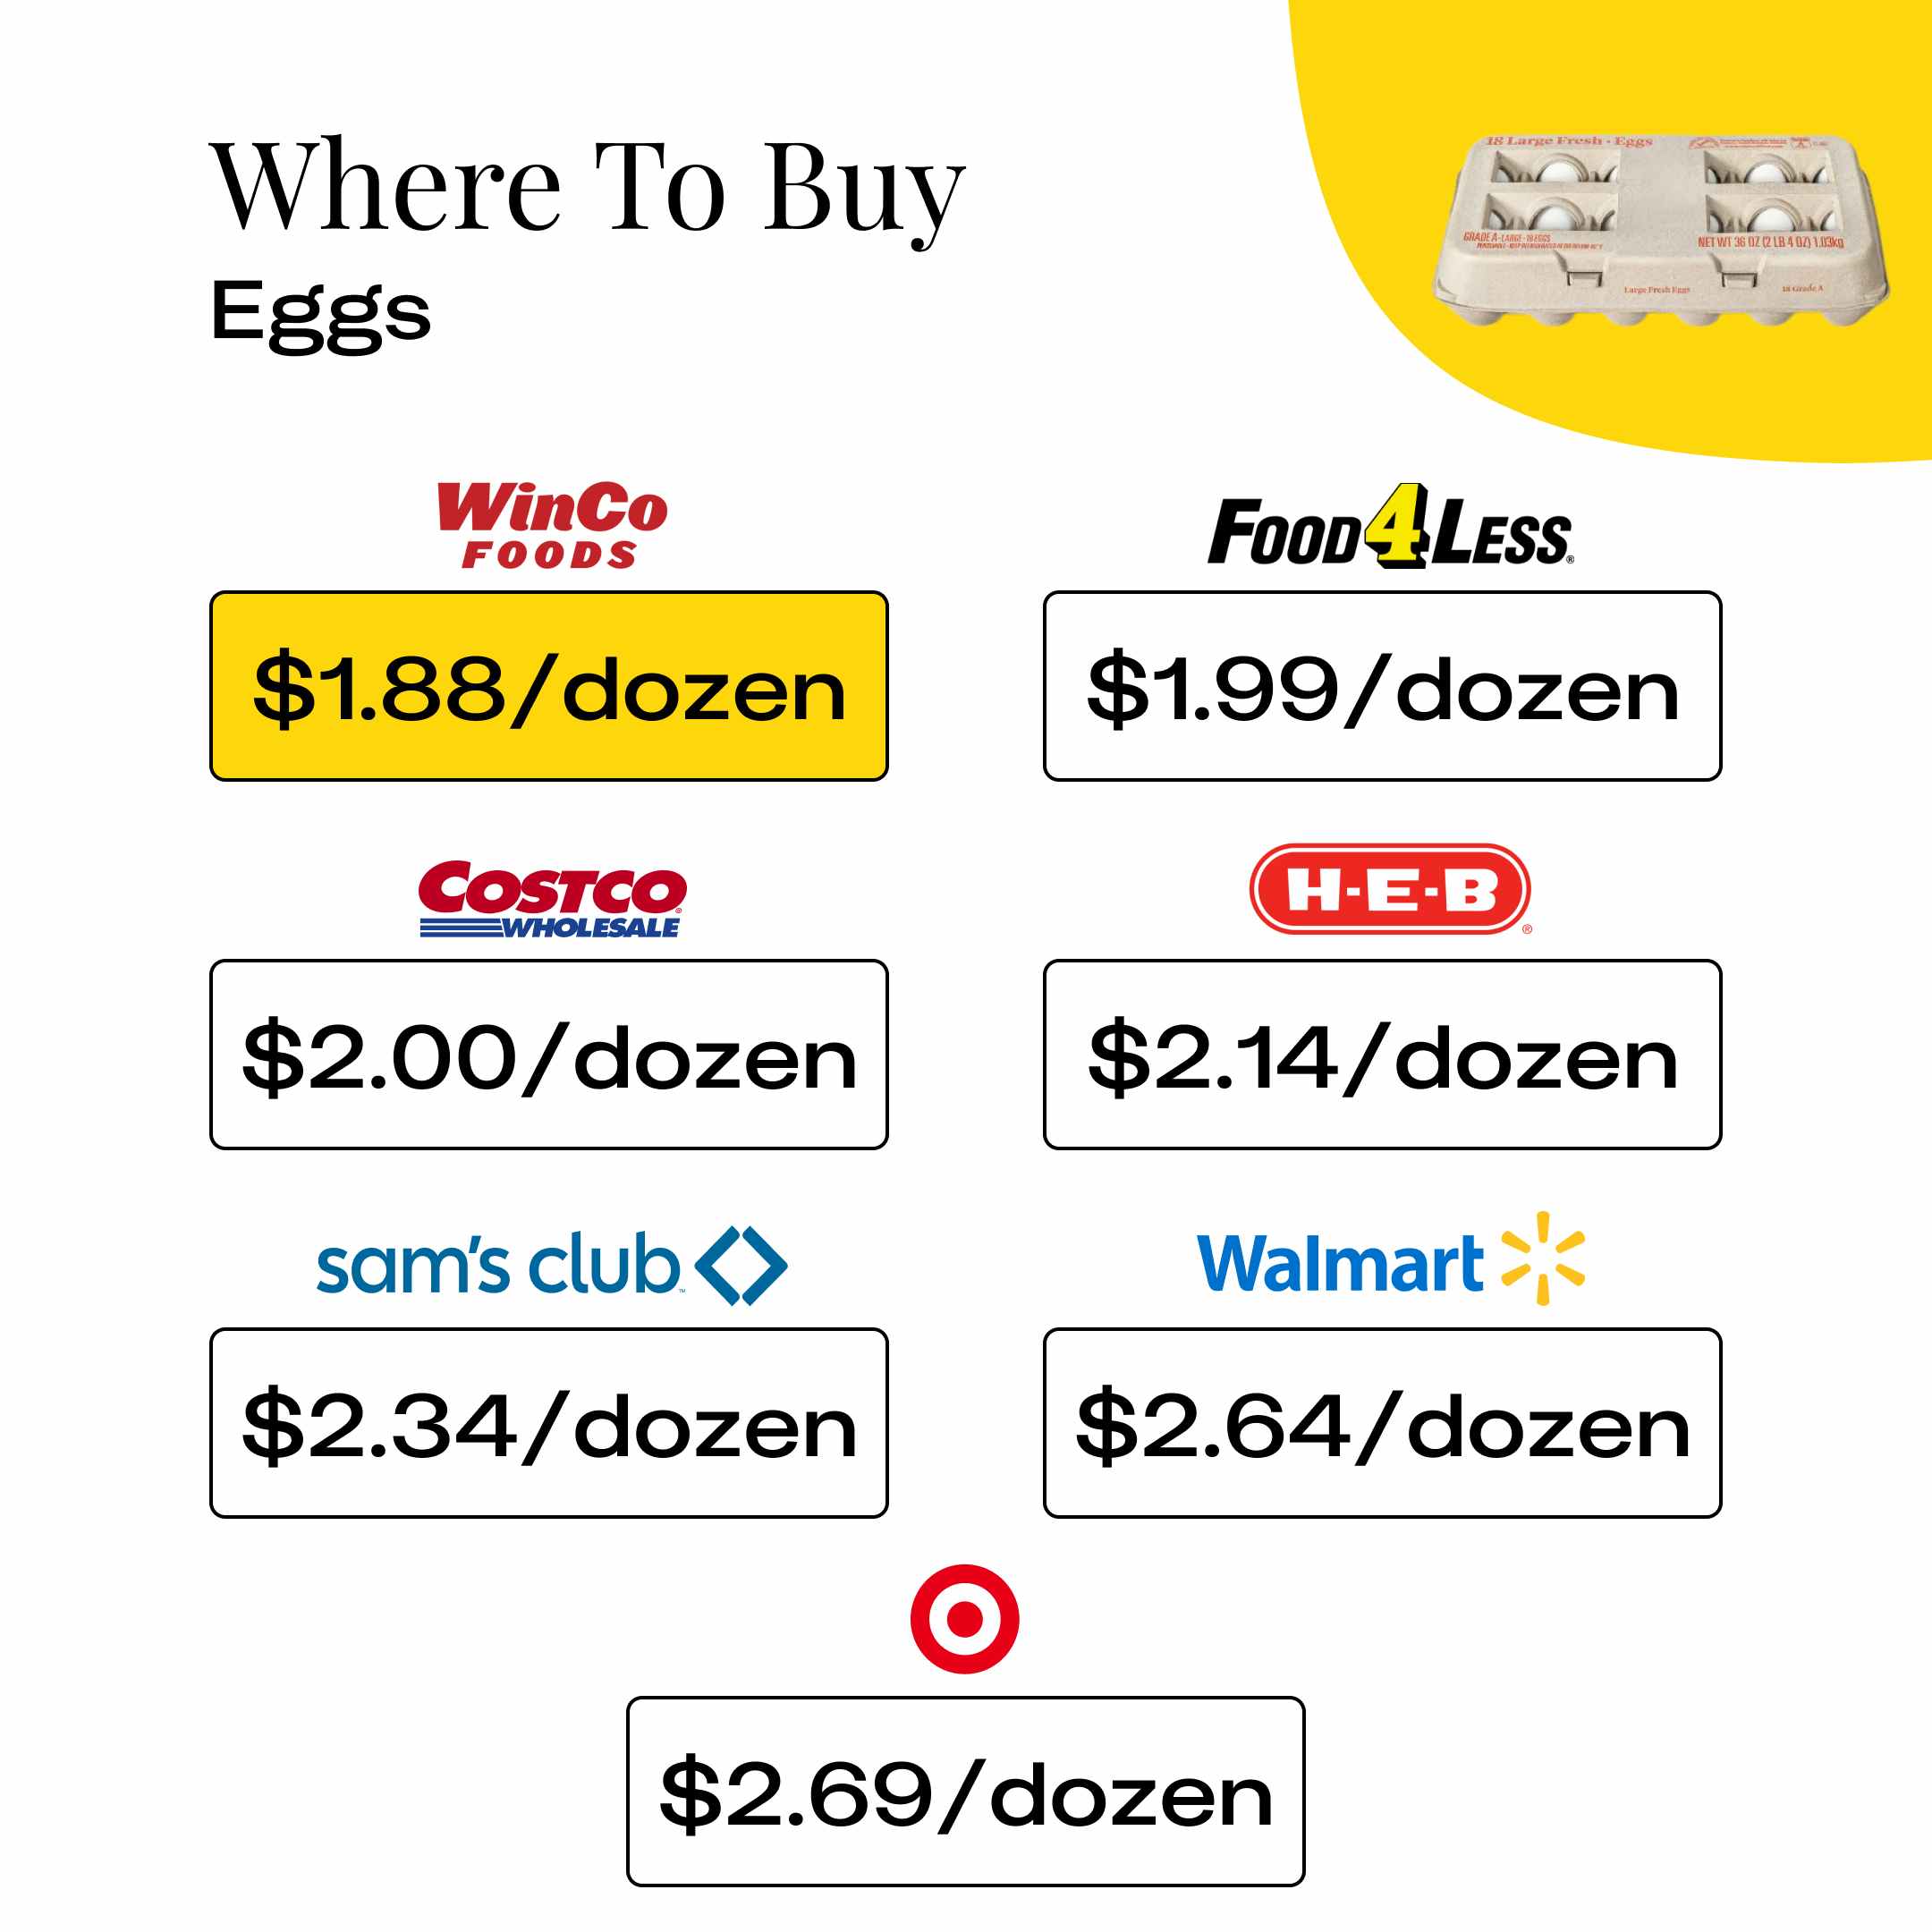 Where To Buy Eggs